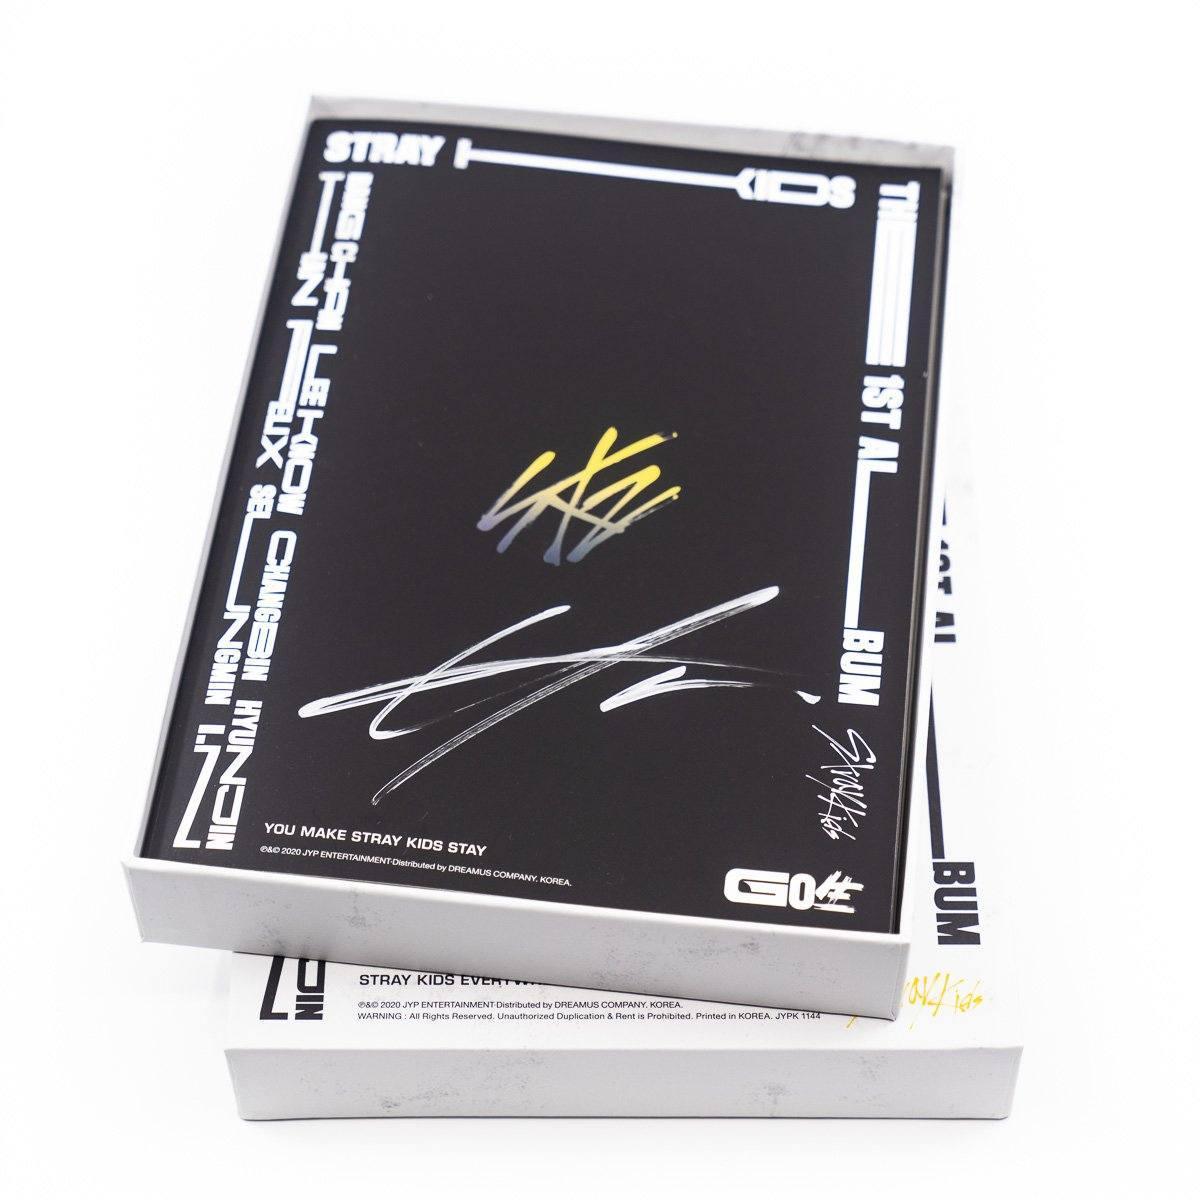 Win an authentic Stray Kids signed Album #2 - KAVE SQUARE